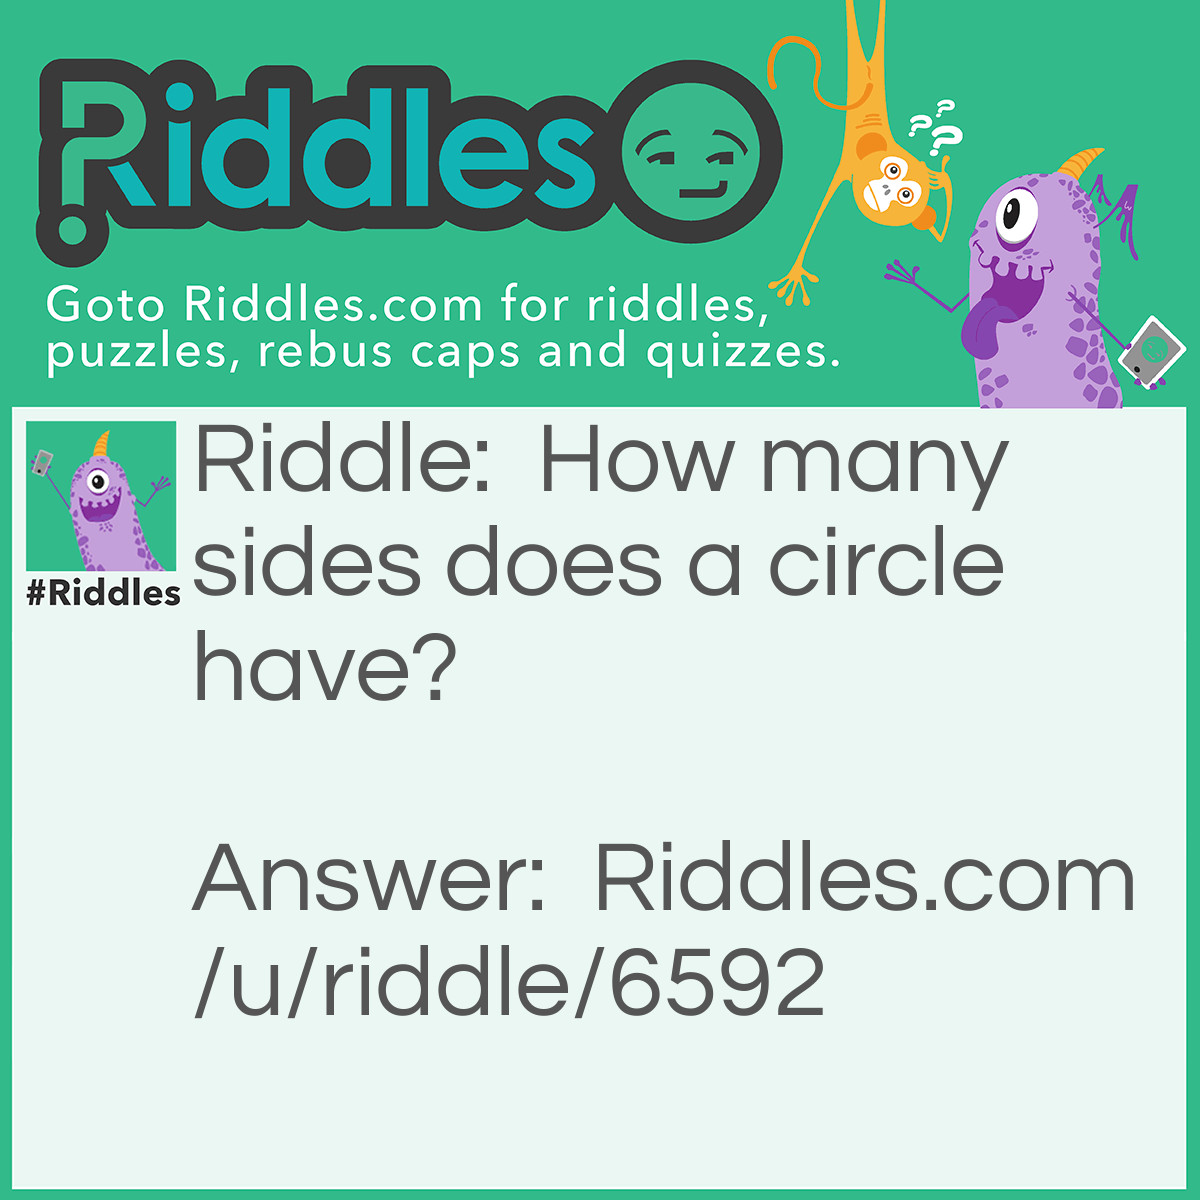 Riddle: How many sides does a circle have? Answer: Two, inside and outside.